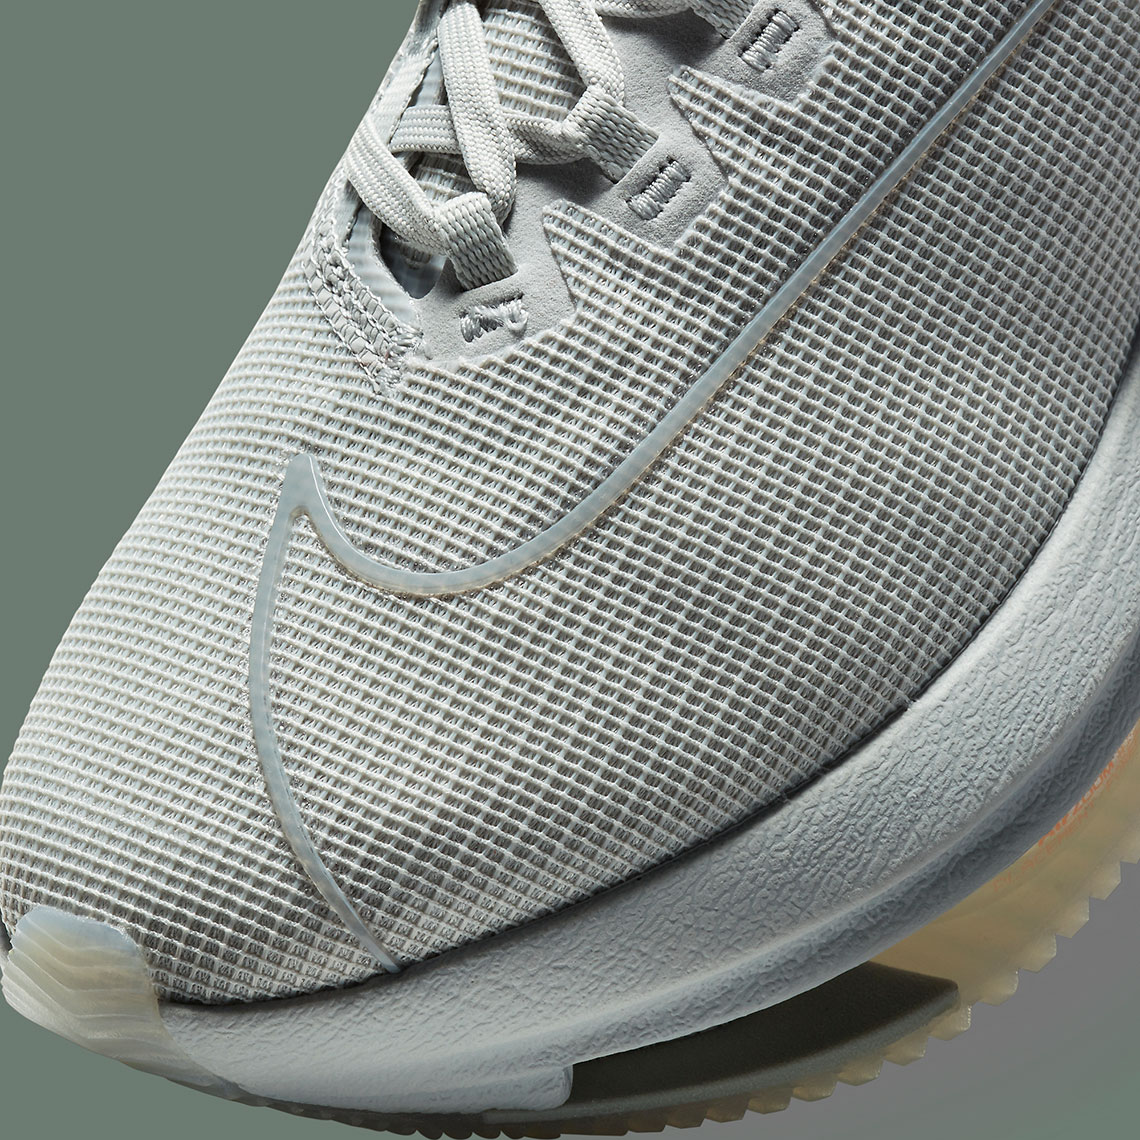 Nike Zoom Double Stacked Grey Fog CV8474-001 | SneakerNews.com